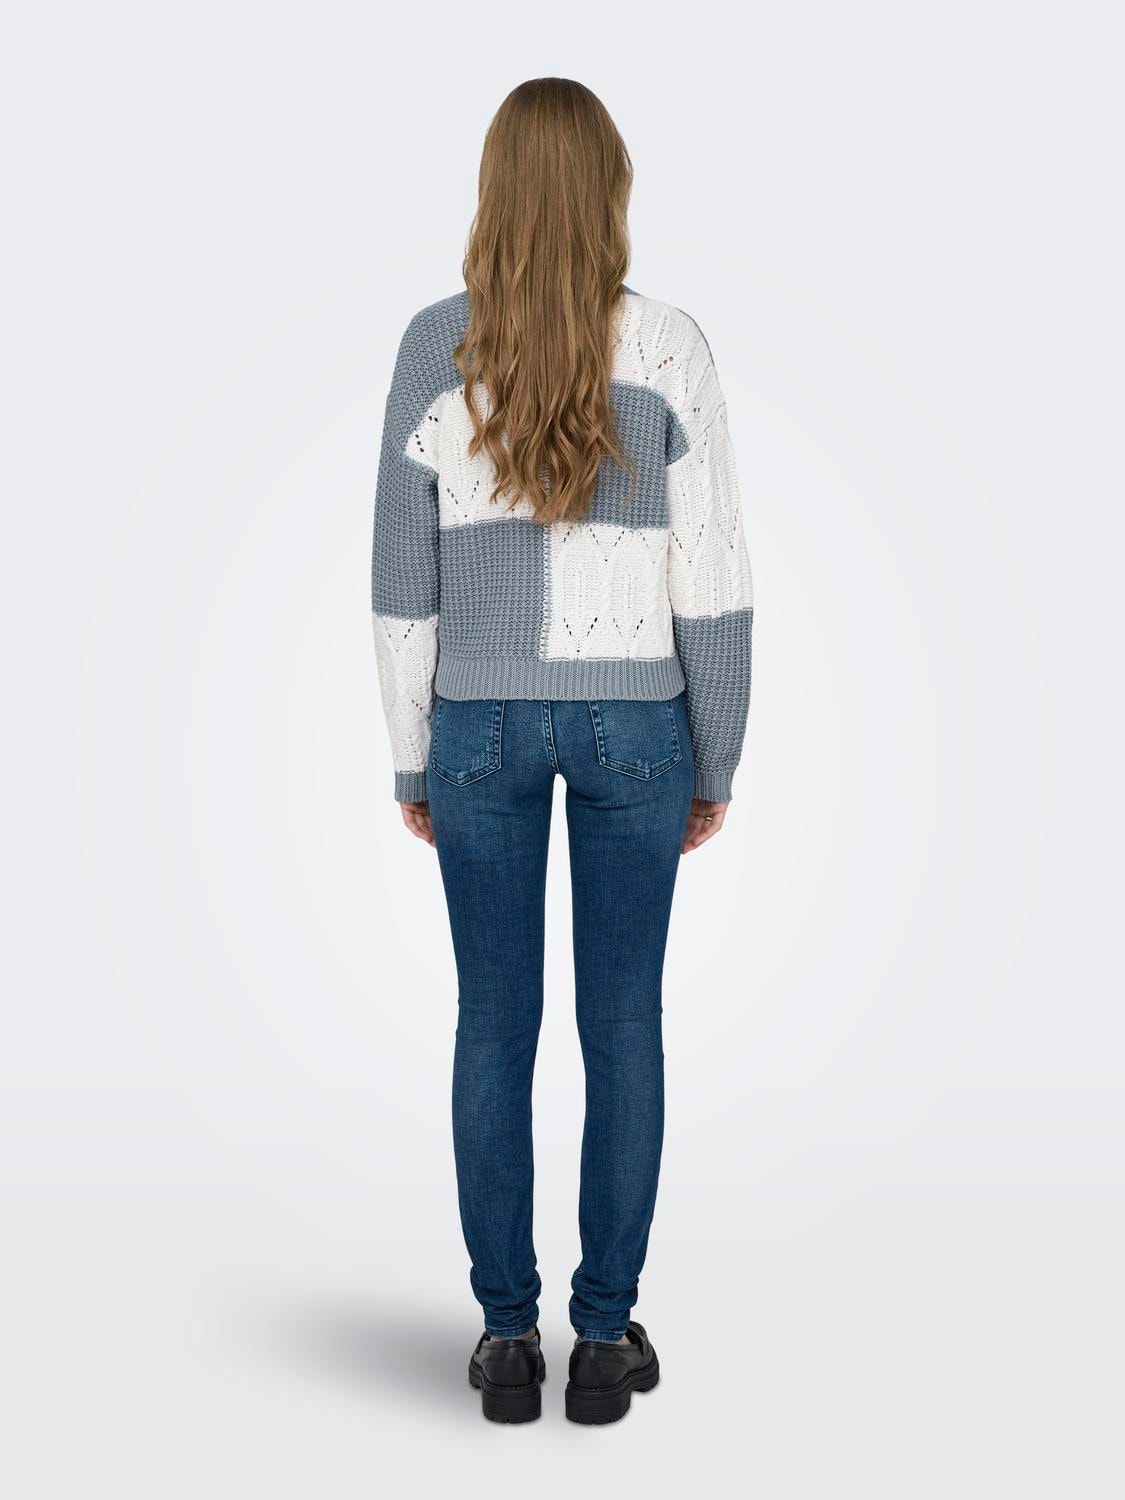 ONLY Knit Fit Round Neck Pullover -Abyss - 15276930